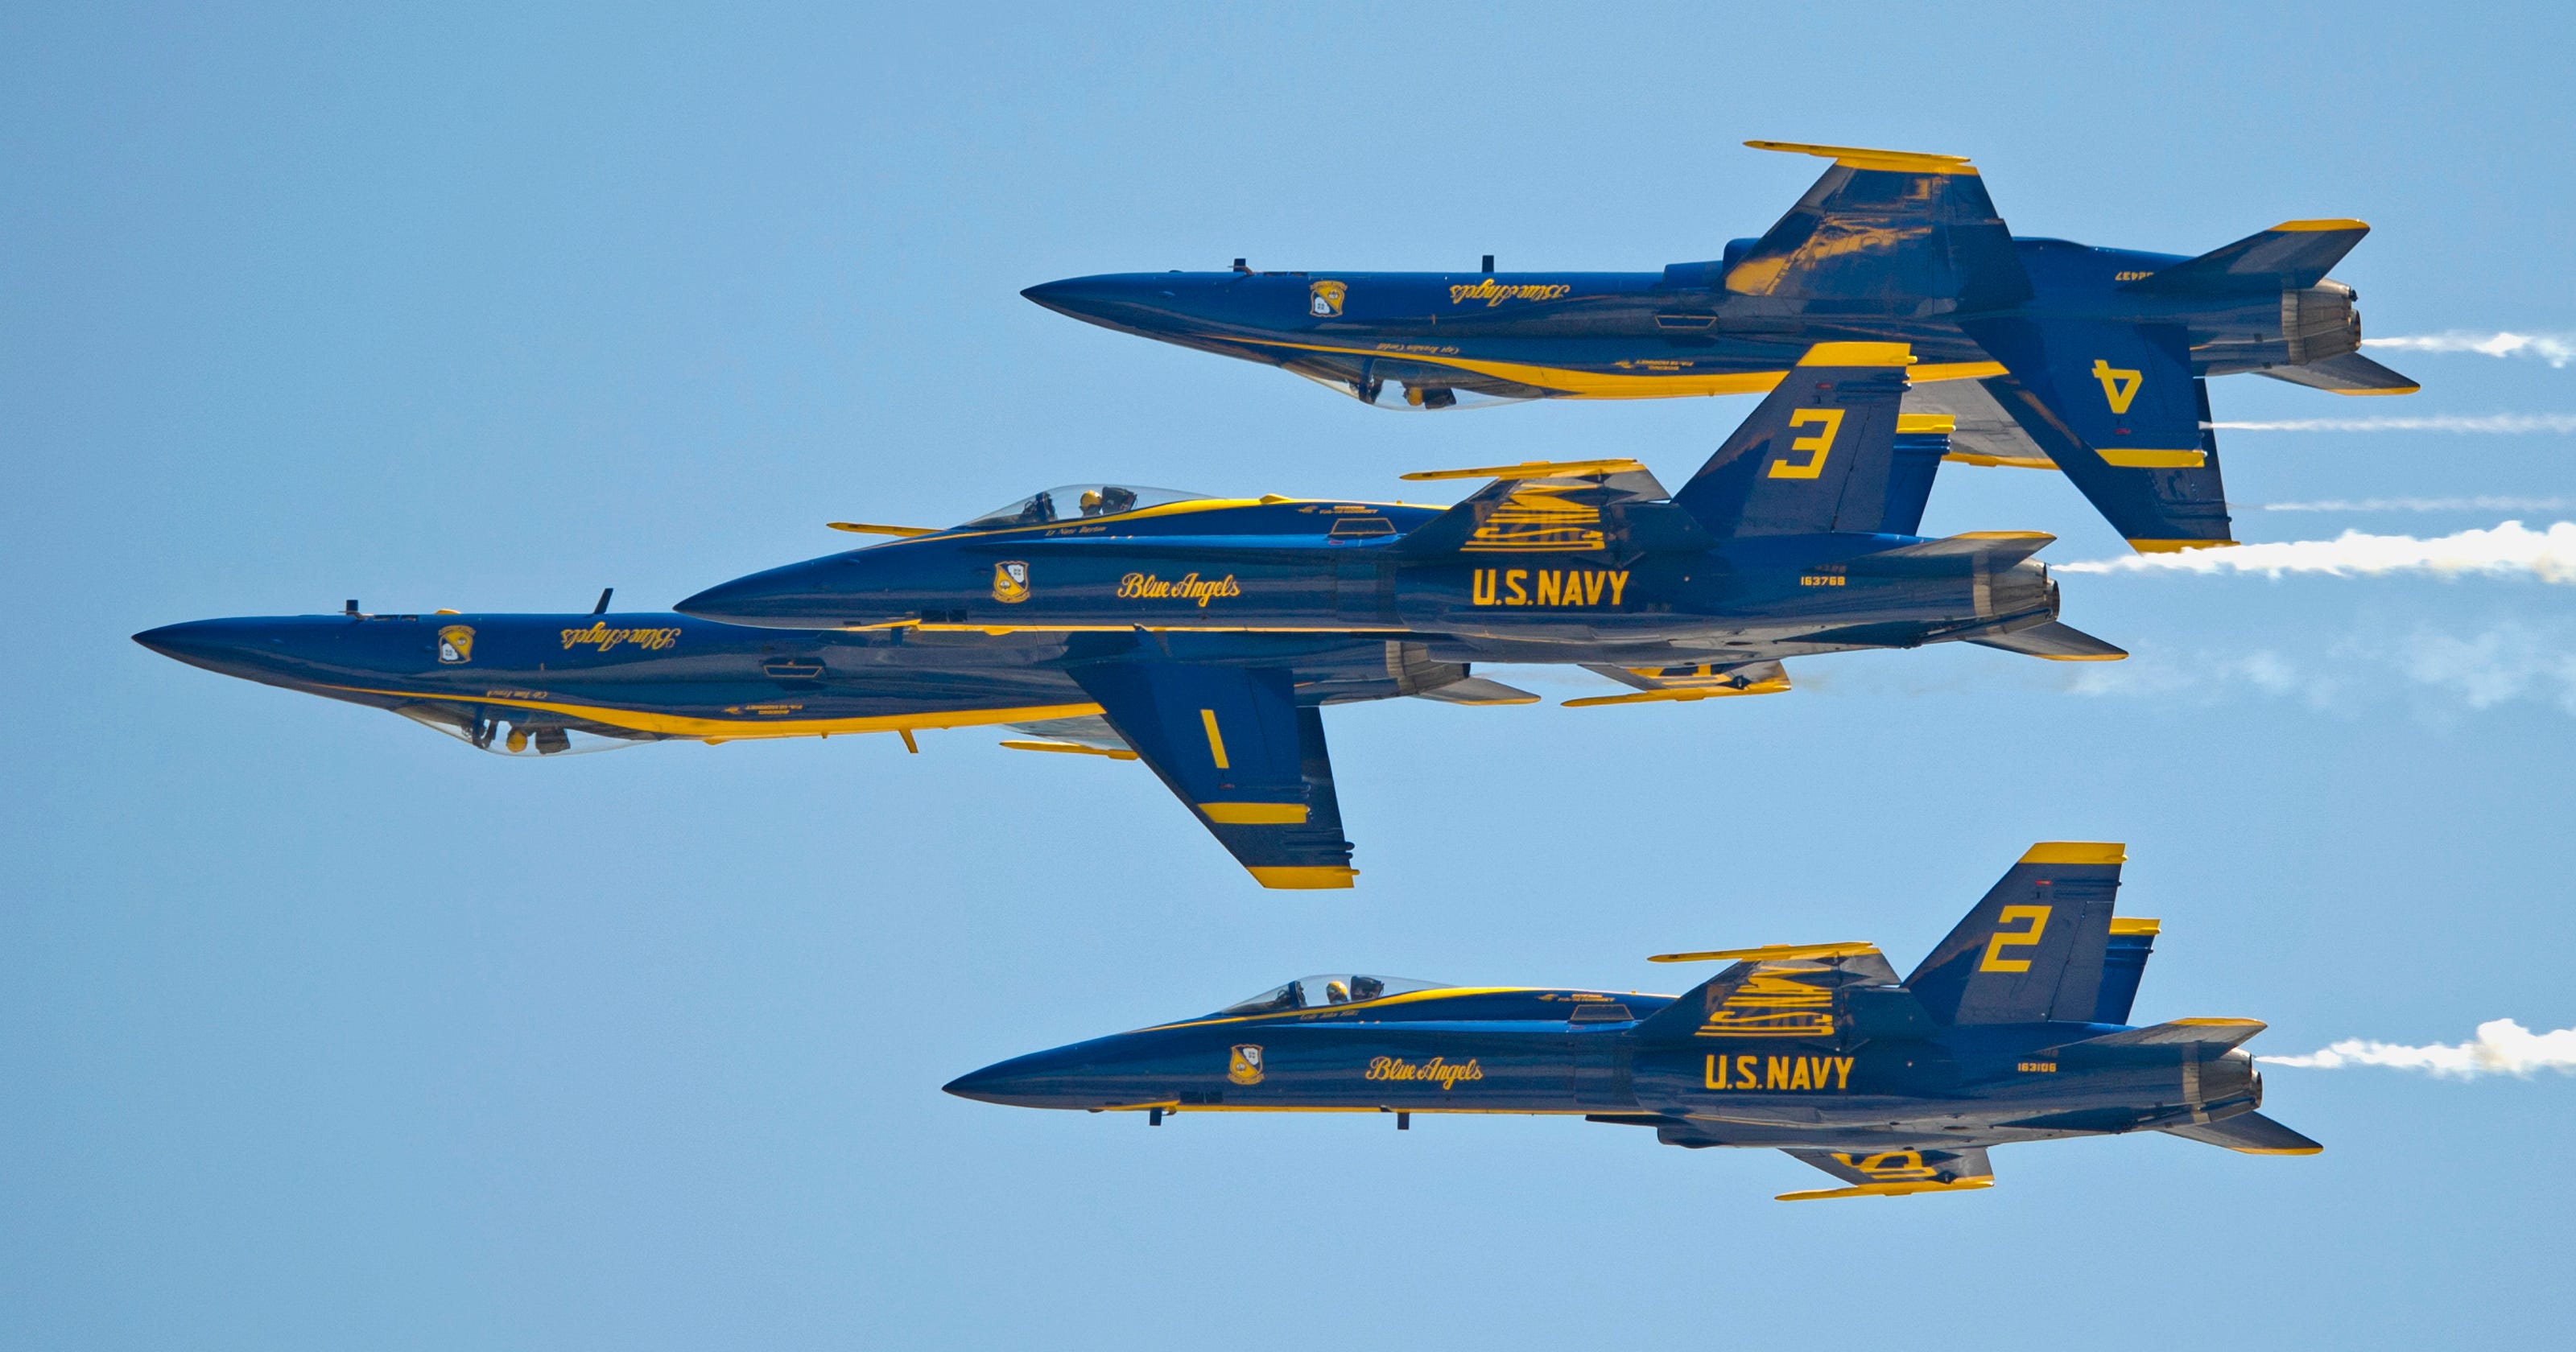 Navy's Blue Angels returning to air with full 2014 lineup